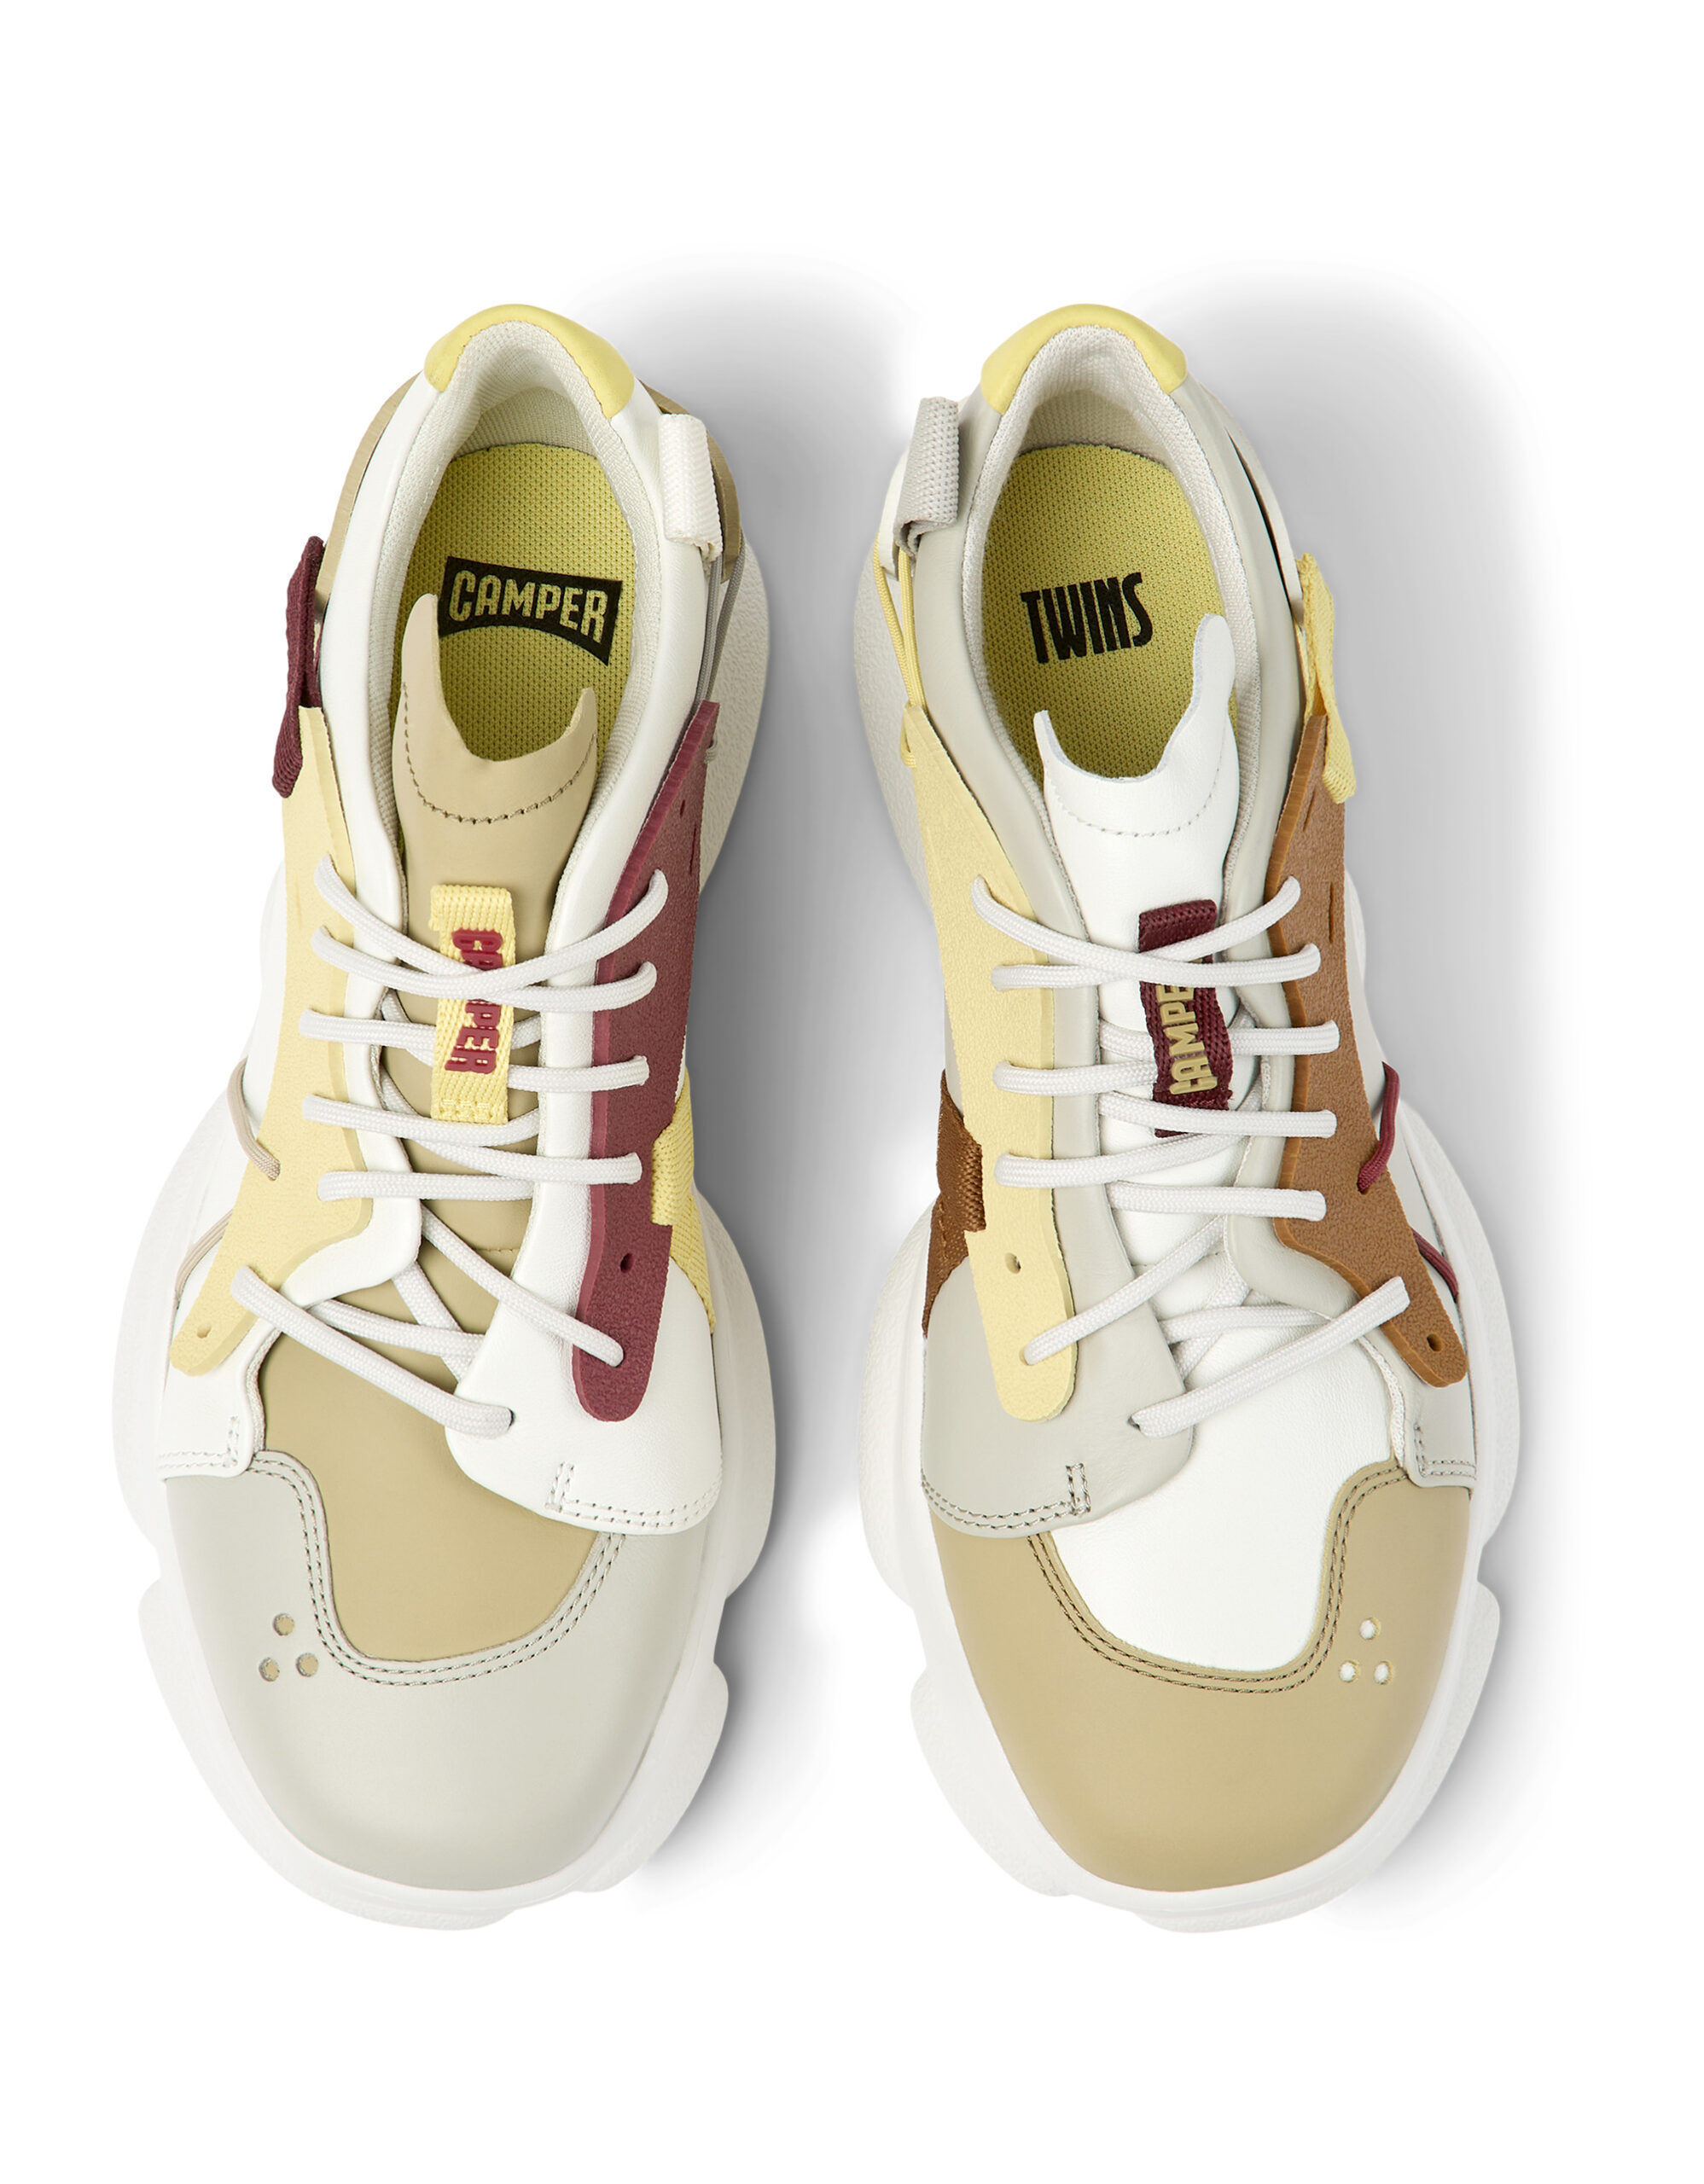 Karst Multicolor Sneakers for Men - Autumn/Winter collection - Camper USA